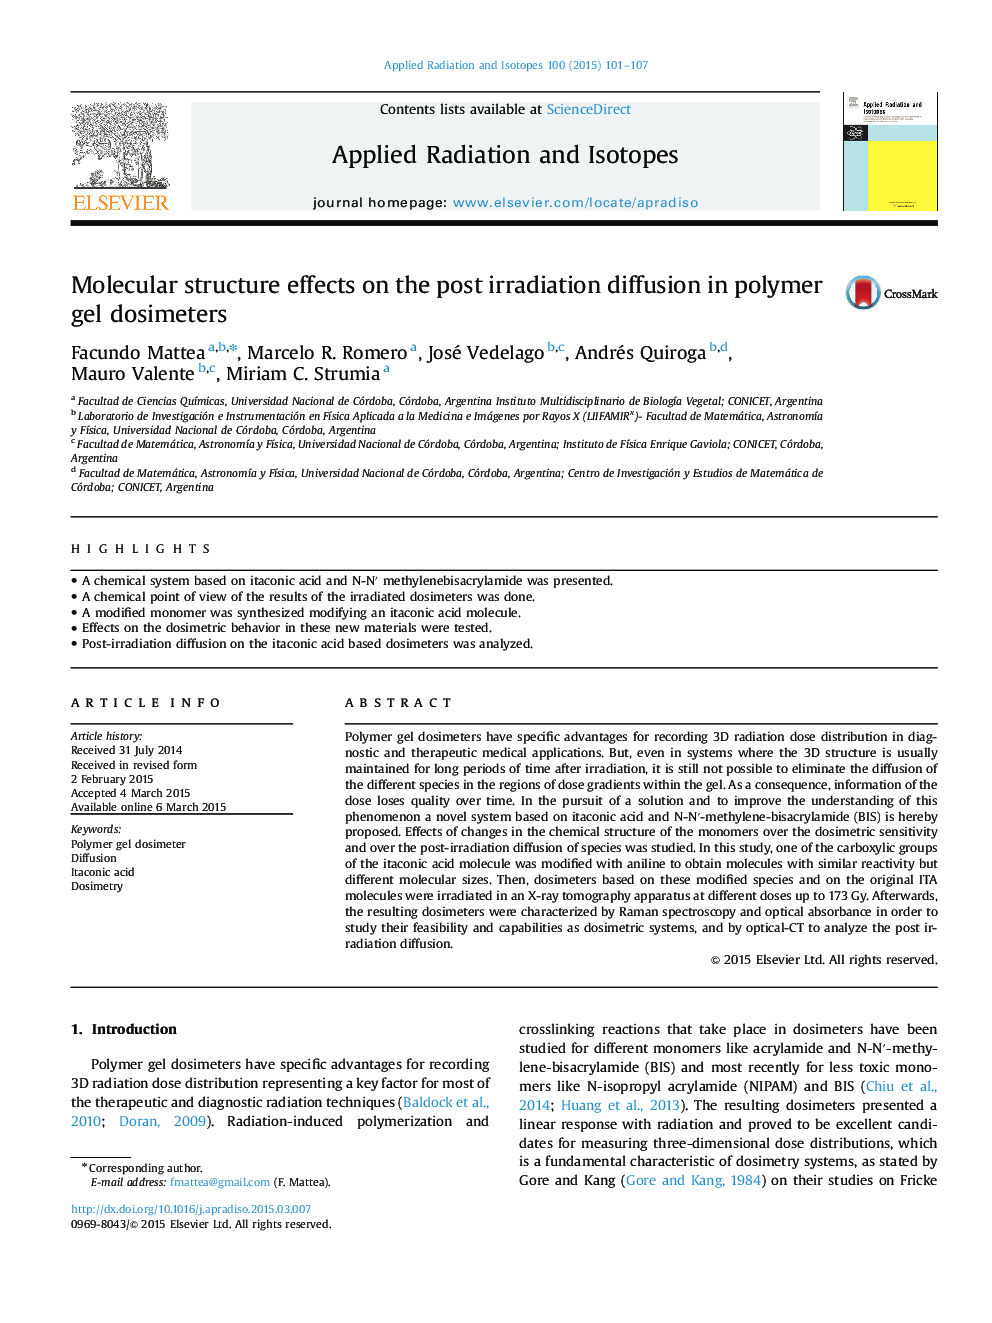 Molecular structure effects on the post irradiation diffusion in polymer gel dosimeters